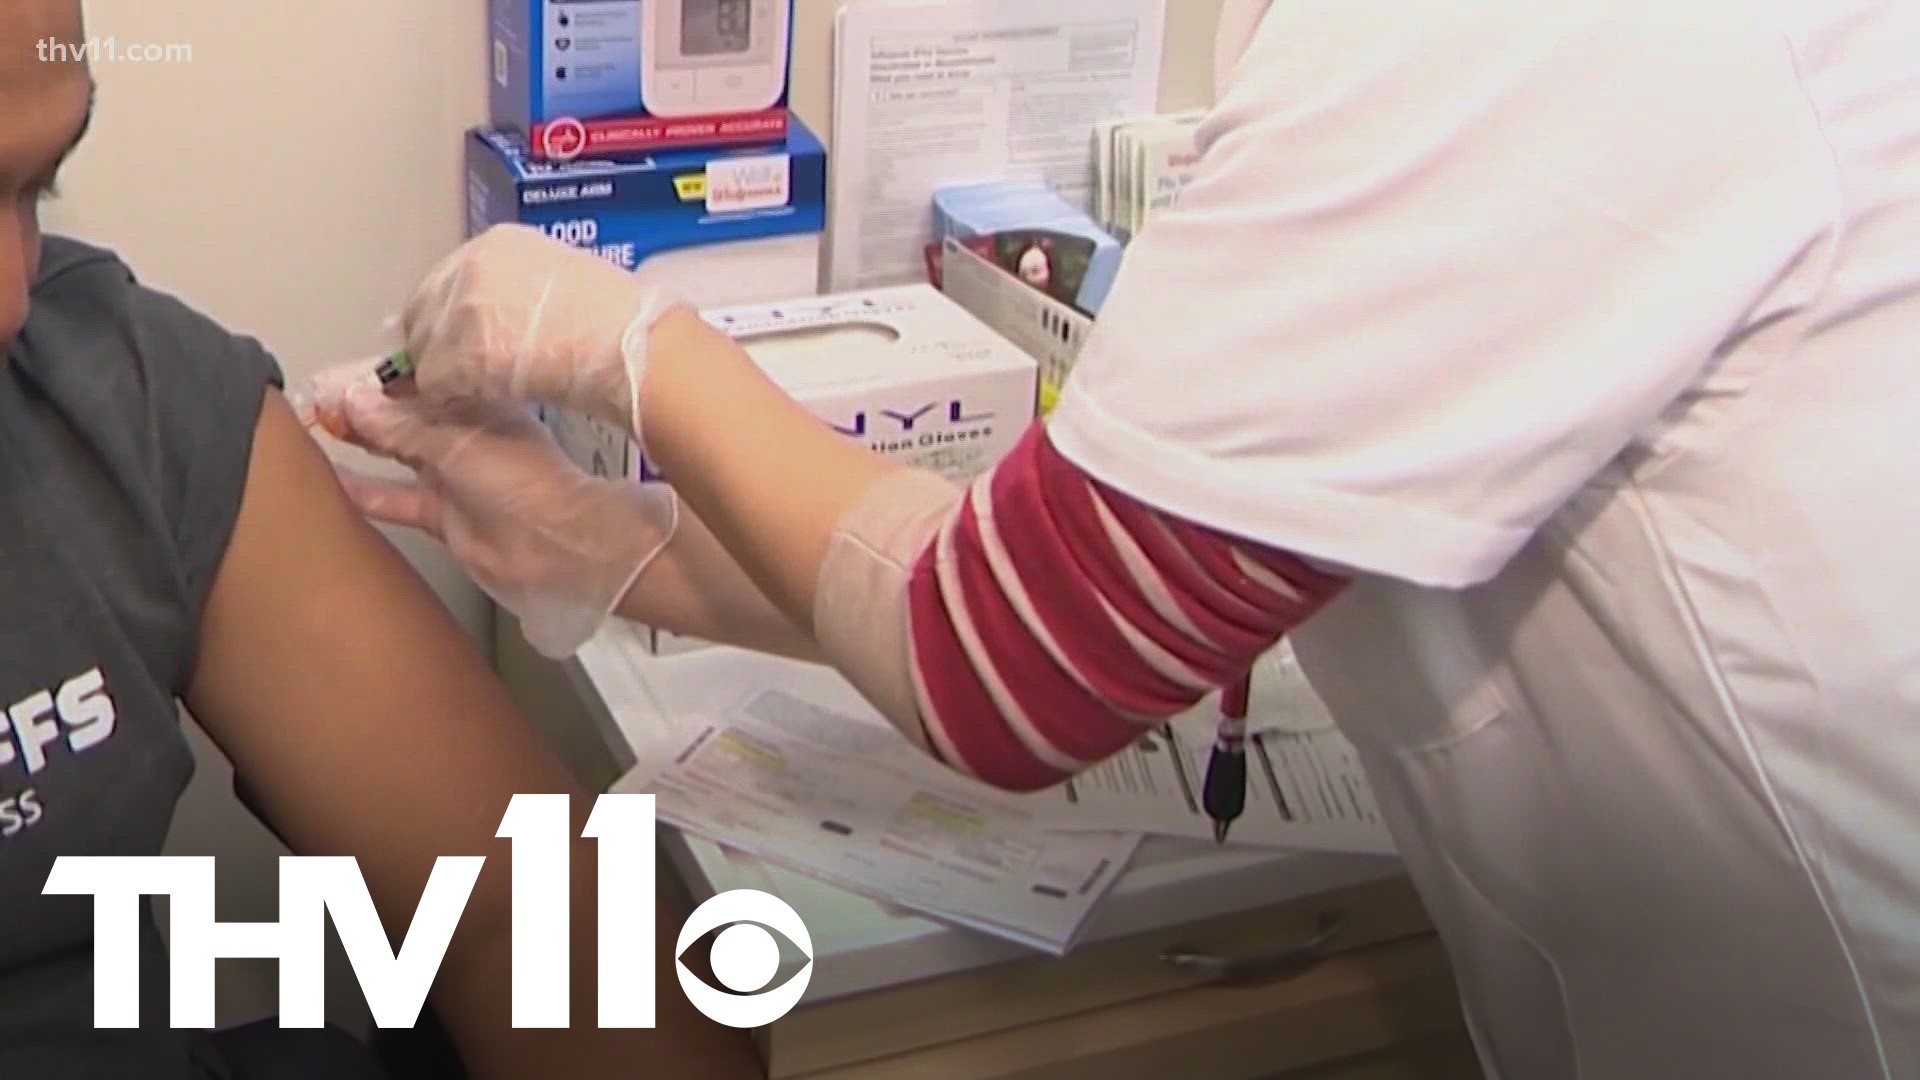 Fall is officially here, which means flu season is right around the corner. Experts are urging Arkansans to take precautions ahead of the flu season.